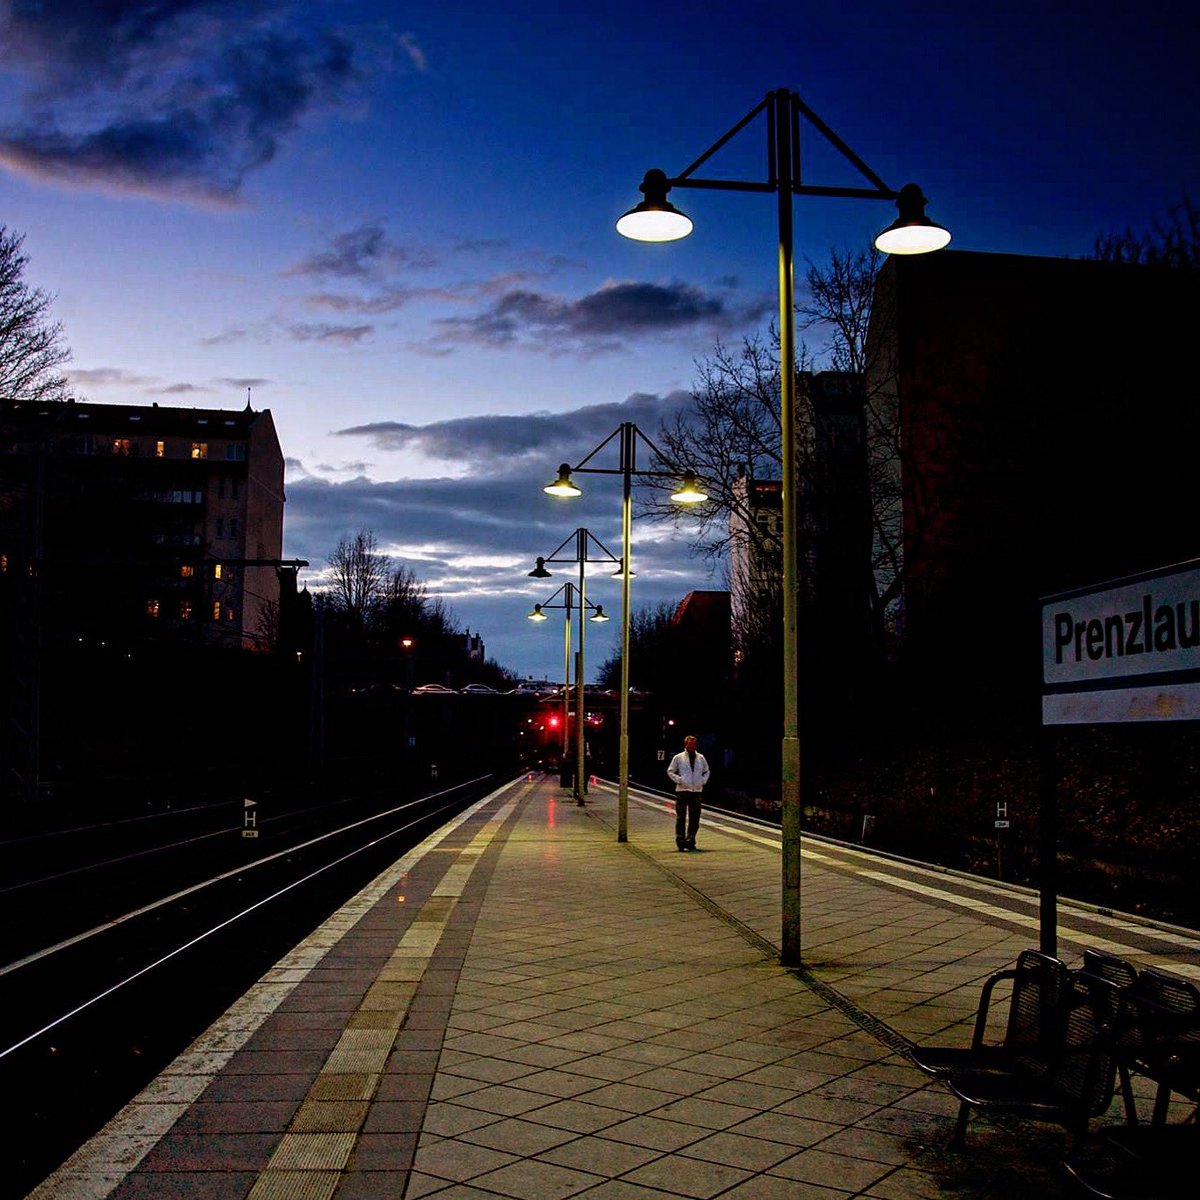 blue hour at the s bahn #berlin